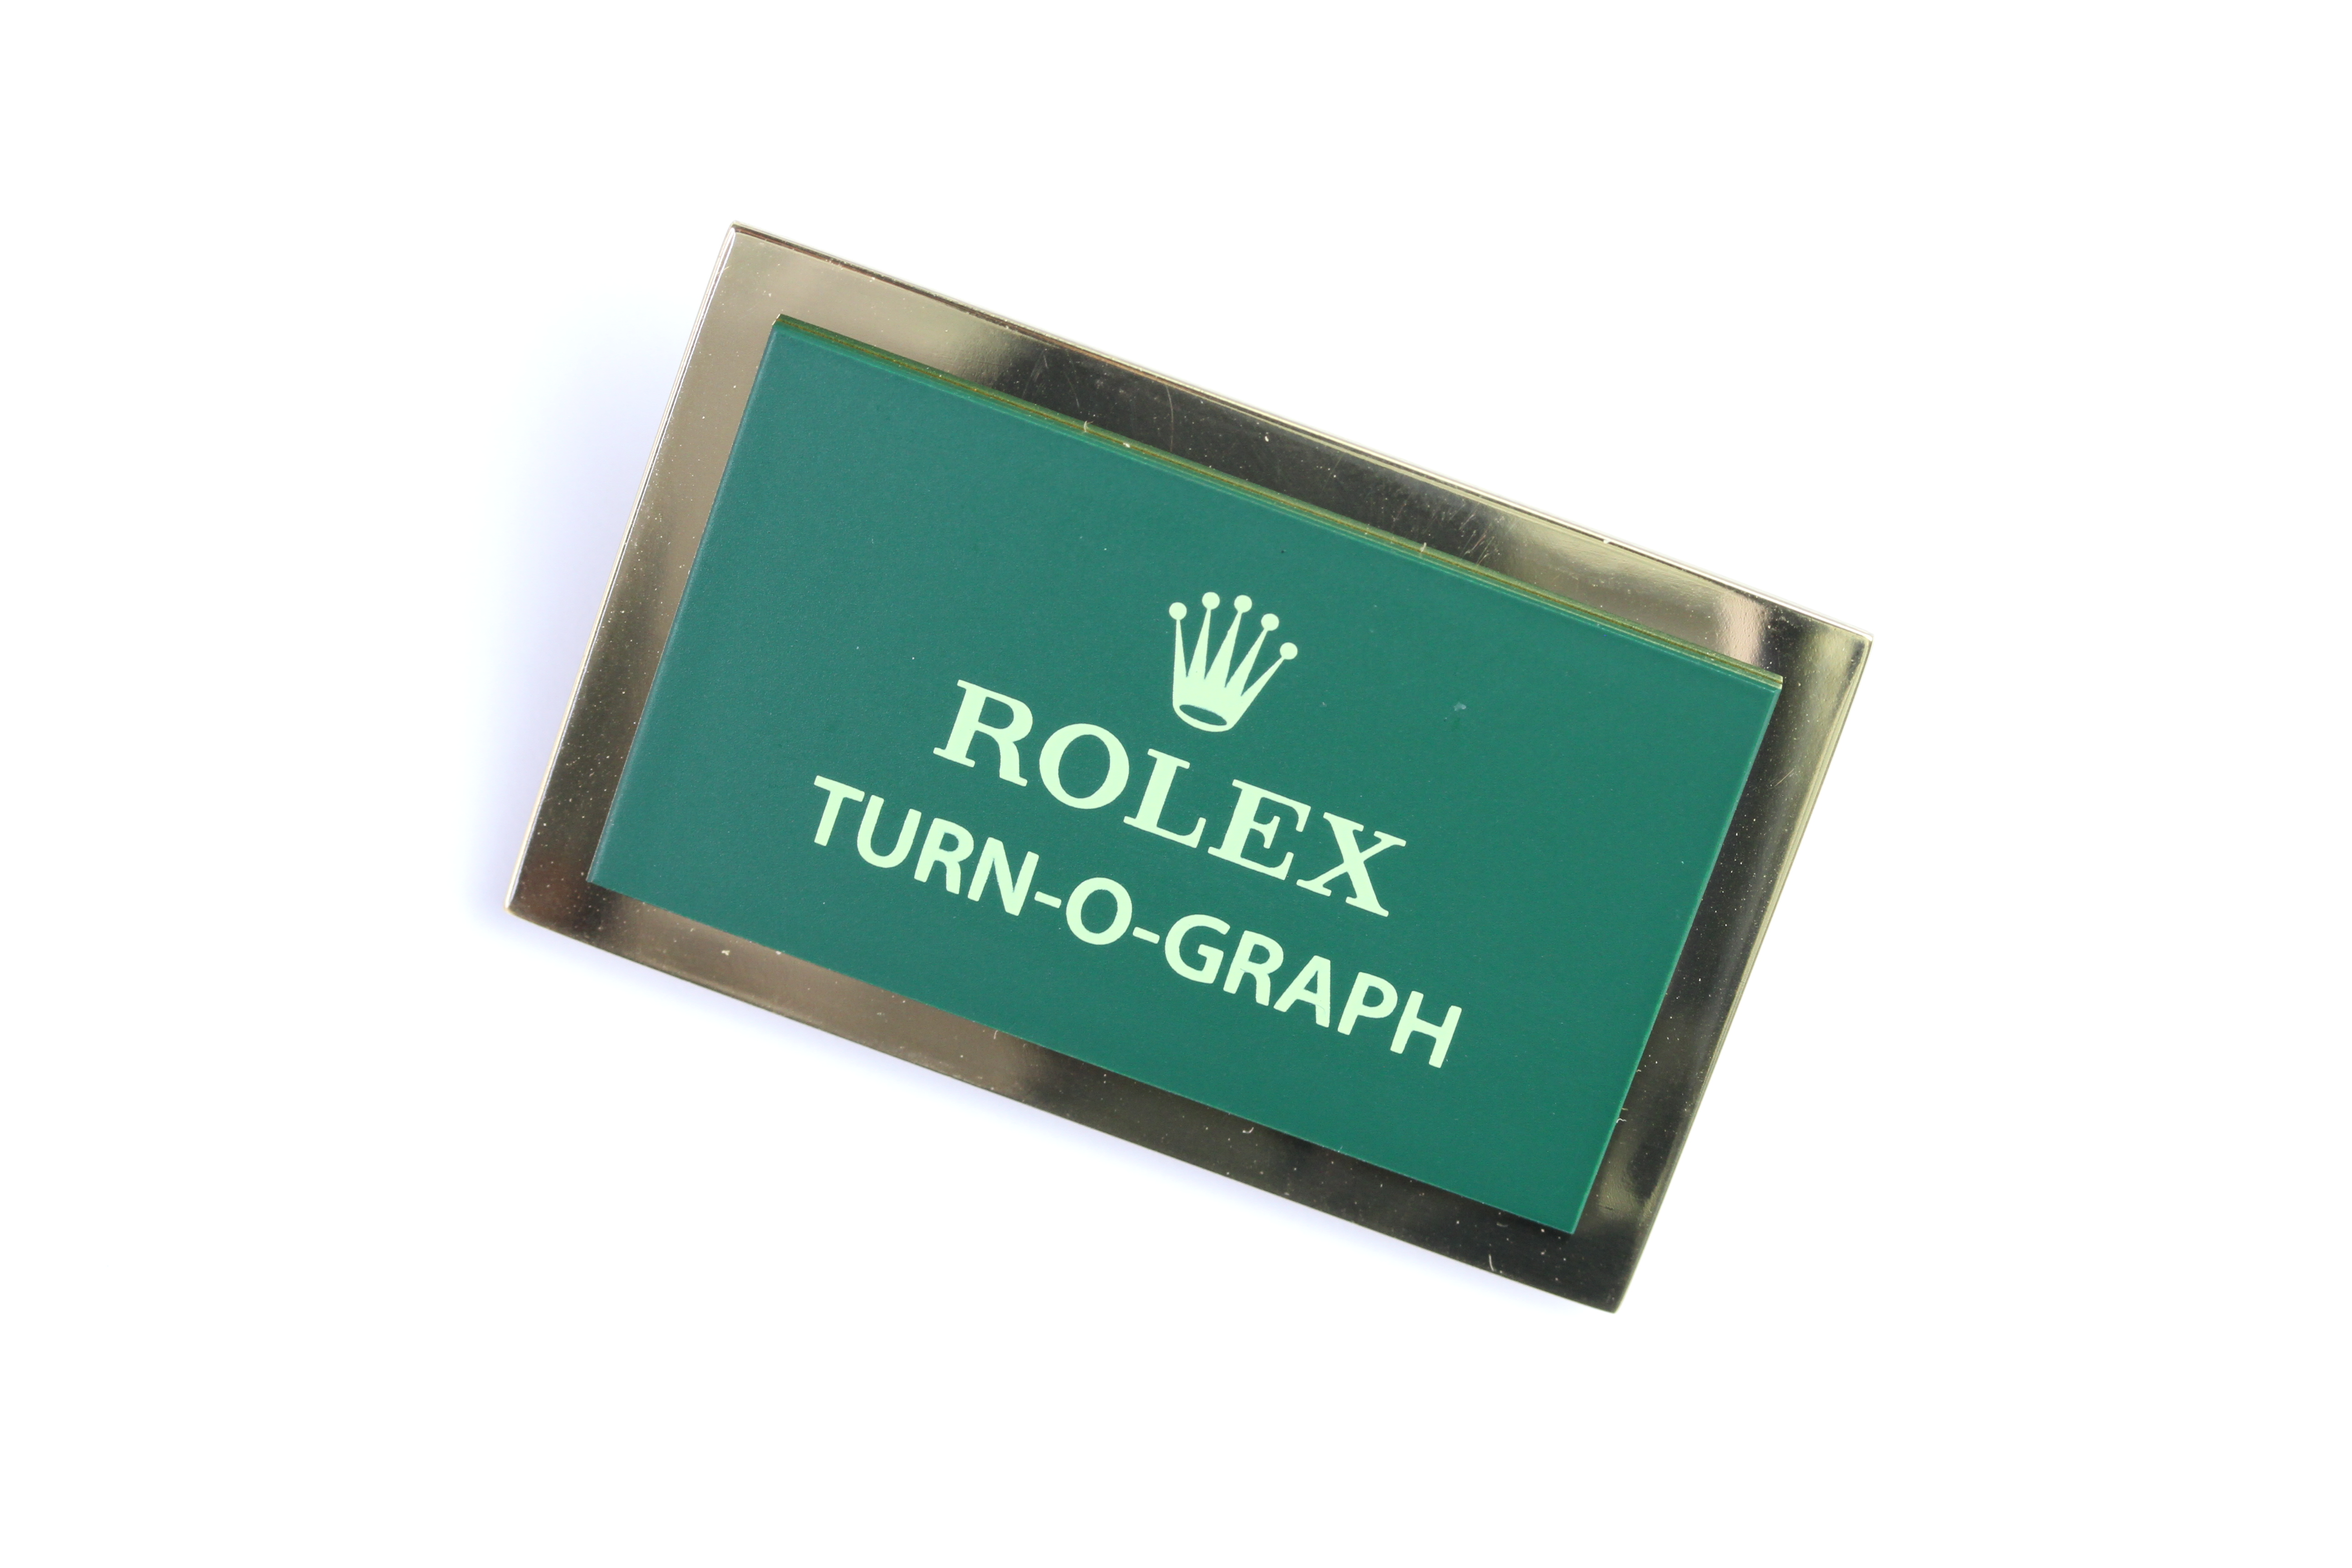 *TO BE SOLD WITHOUT RESERVE* ROLEX TURN-O-GRAPH DISPLAY PLAQUE